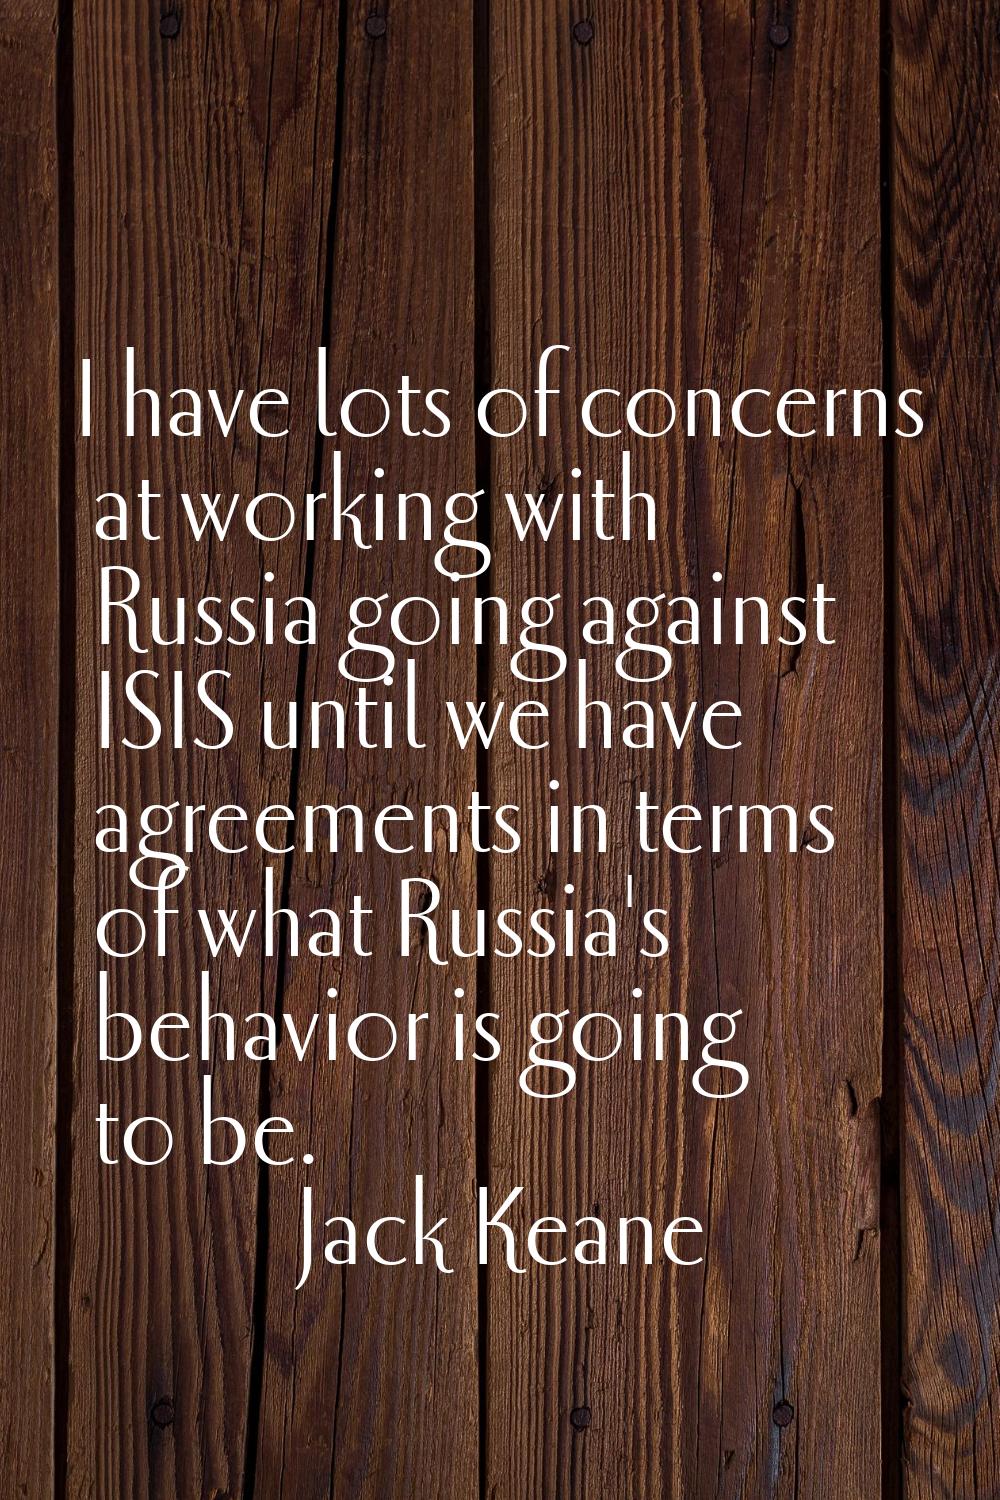 I have lots of concerns at working with Russia going against ISIS until we have agreements in terms